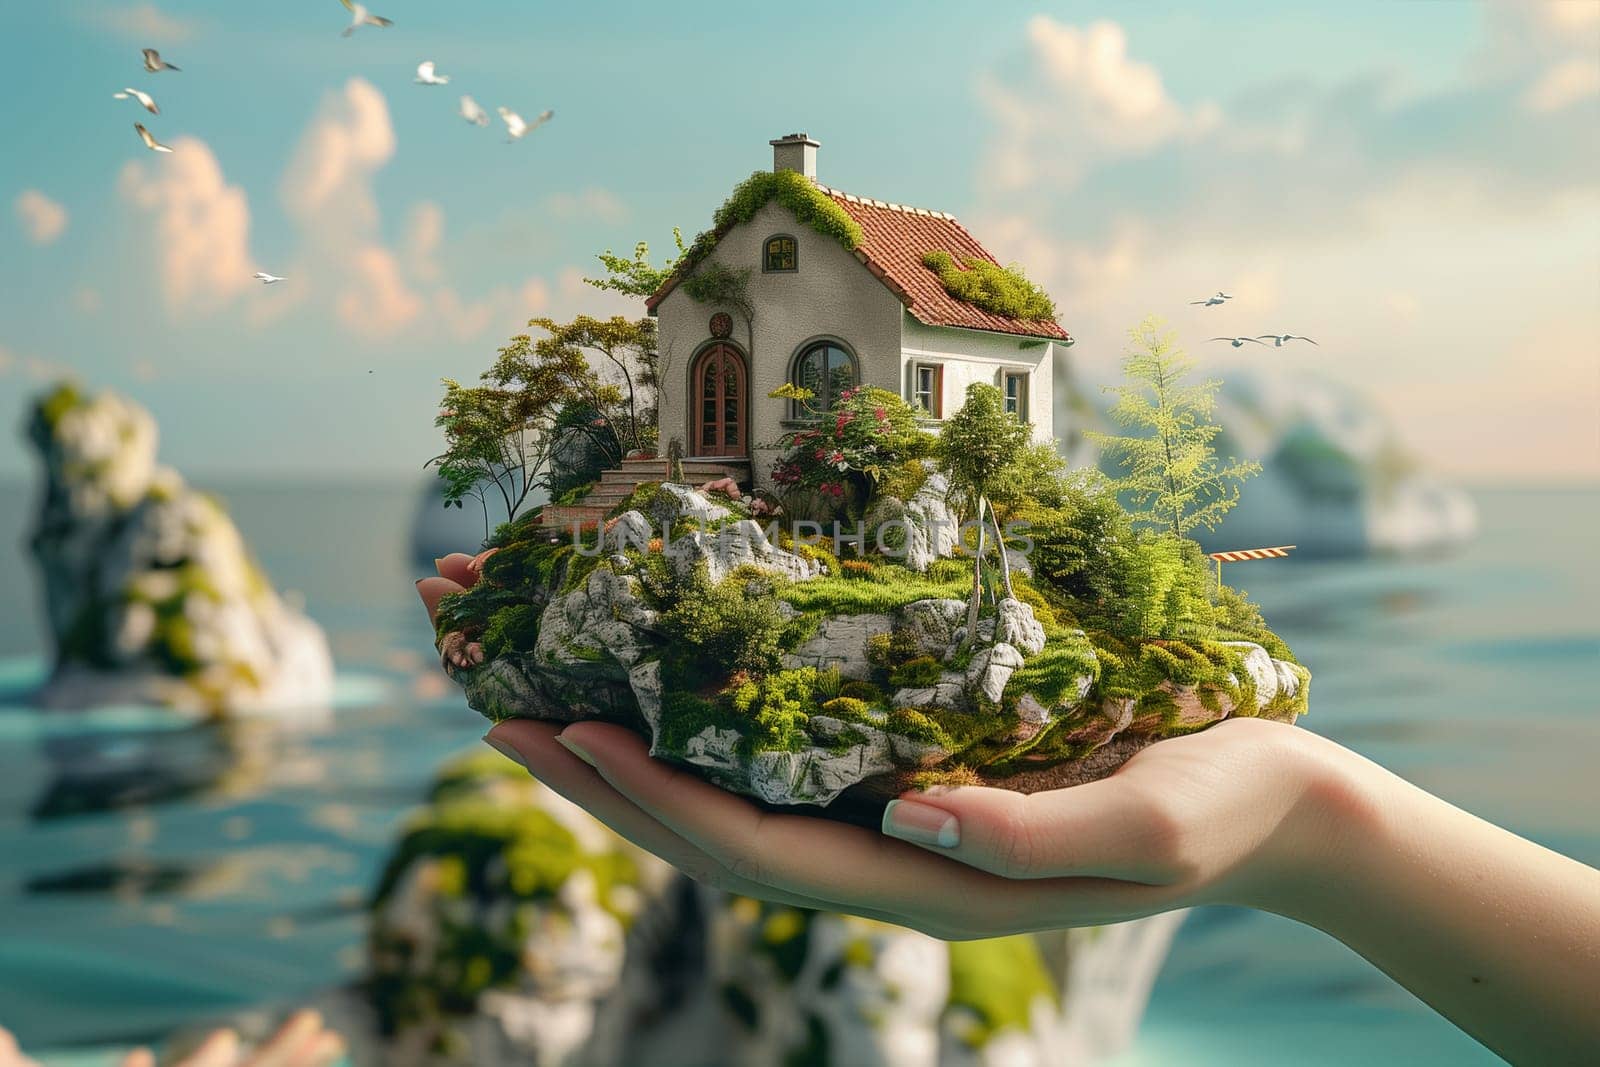 A persons hands holding a miniature house, showcasing scale and perspective.